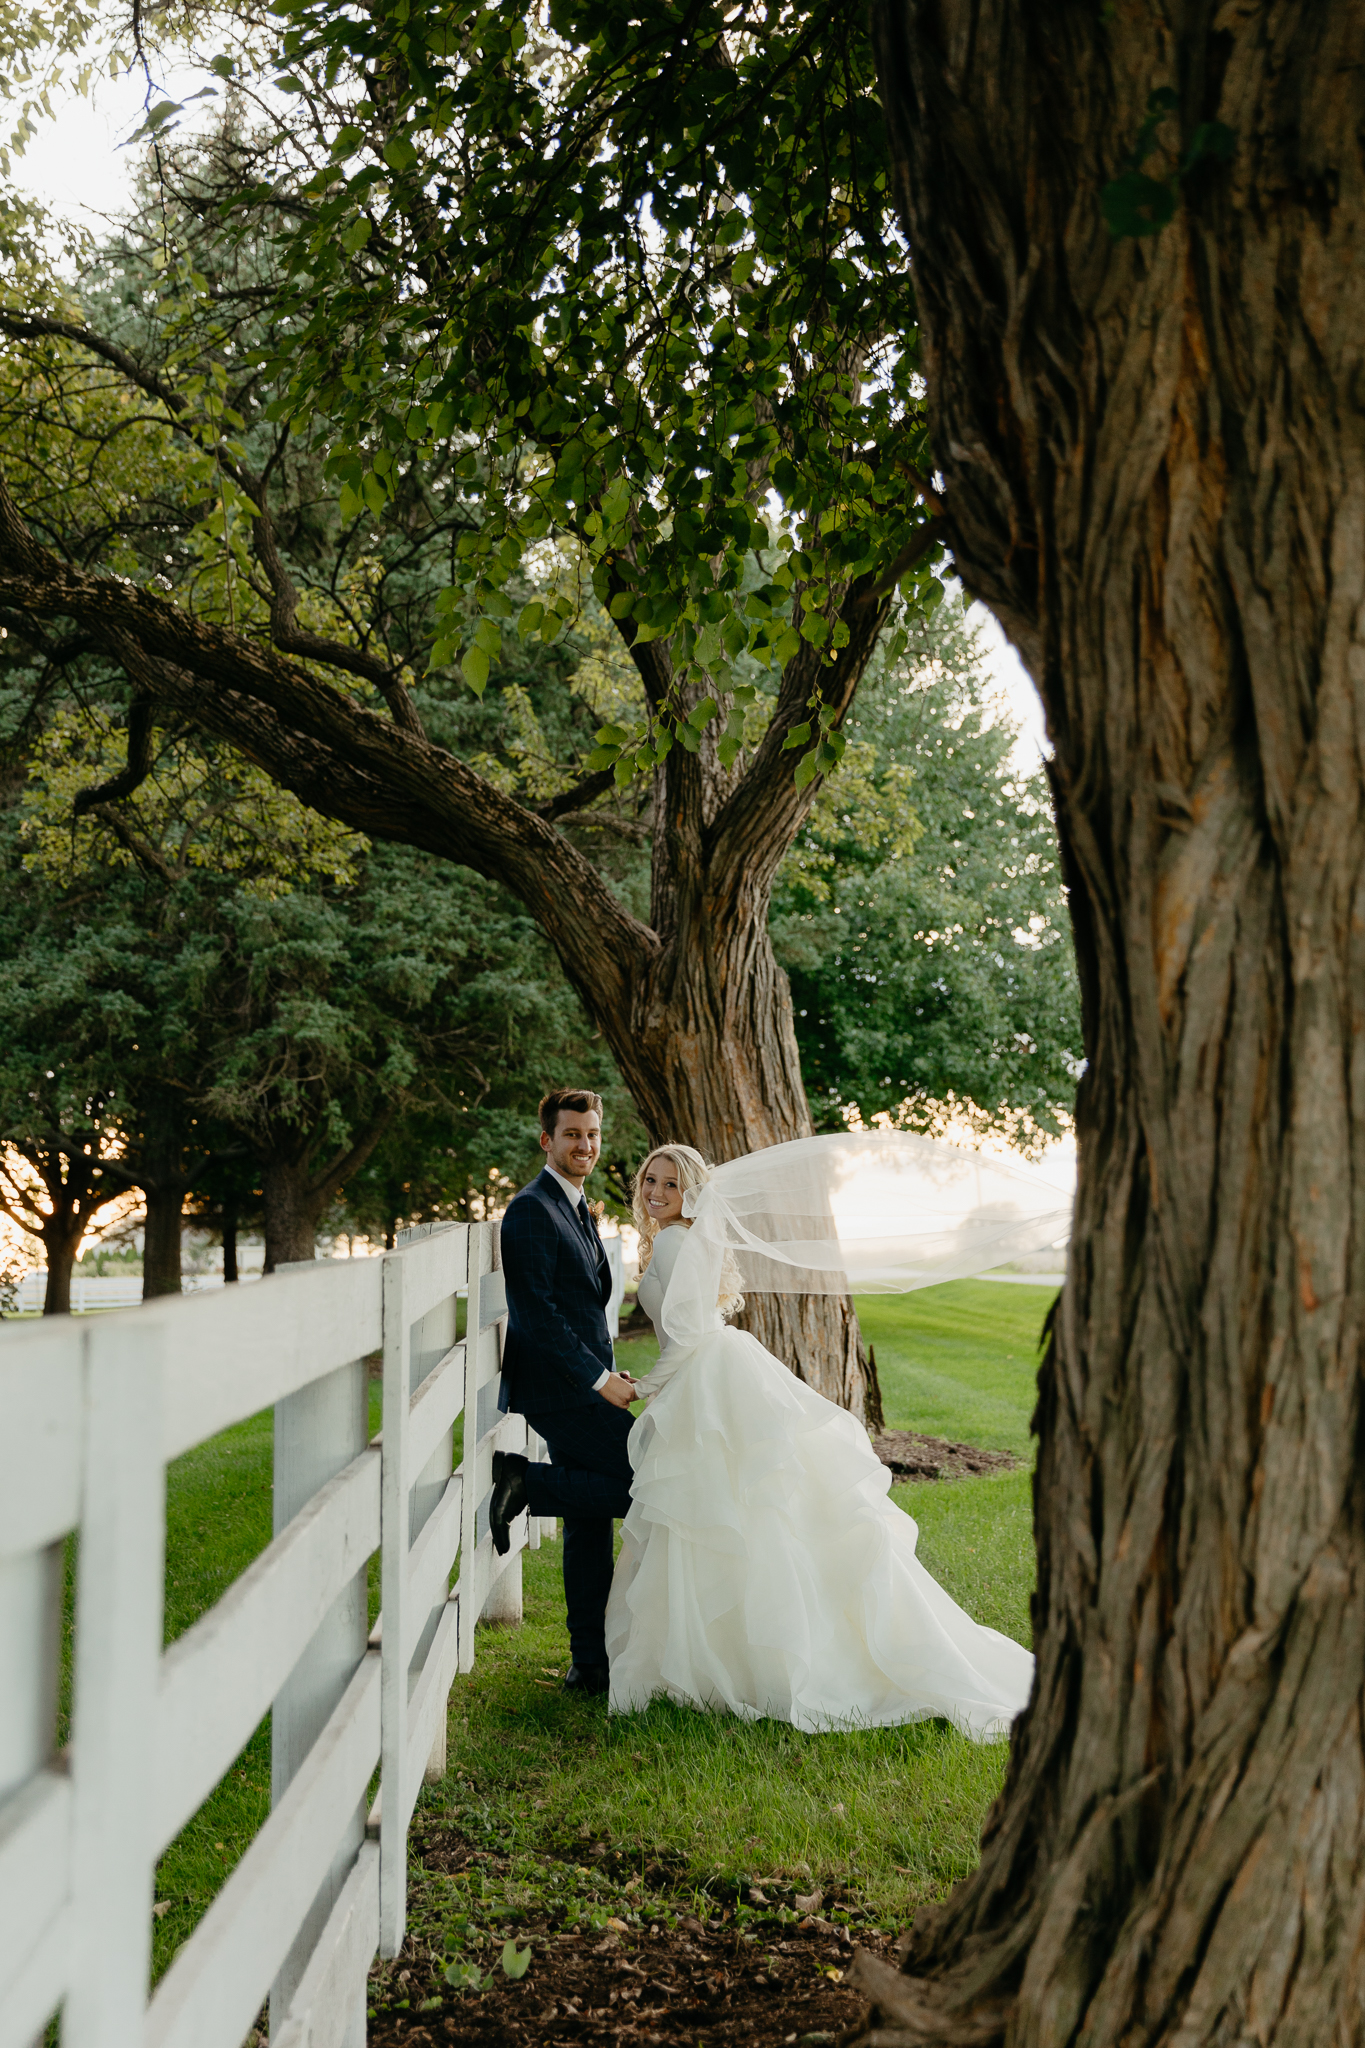 Bride and groom hold hands and lean against a white horse fence, smiling at the camera